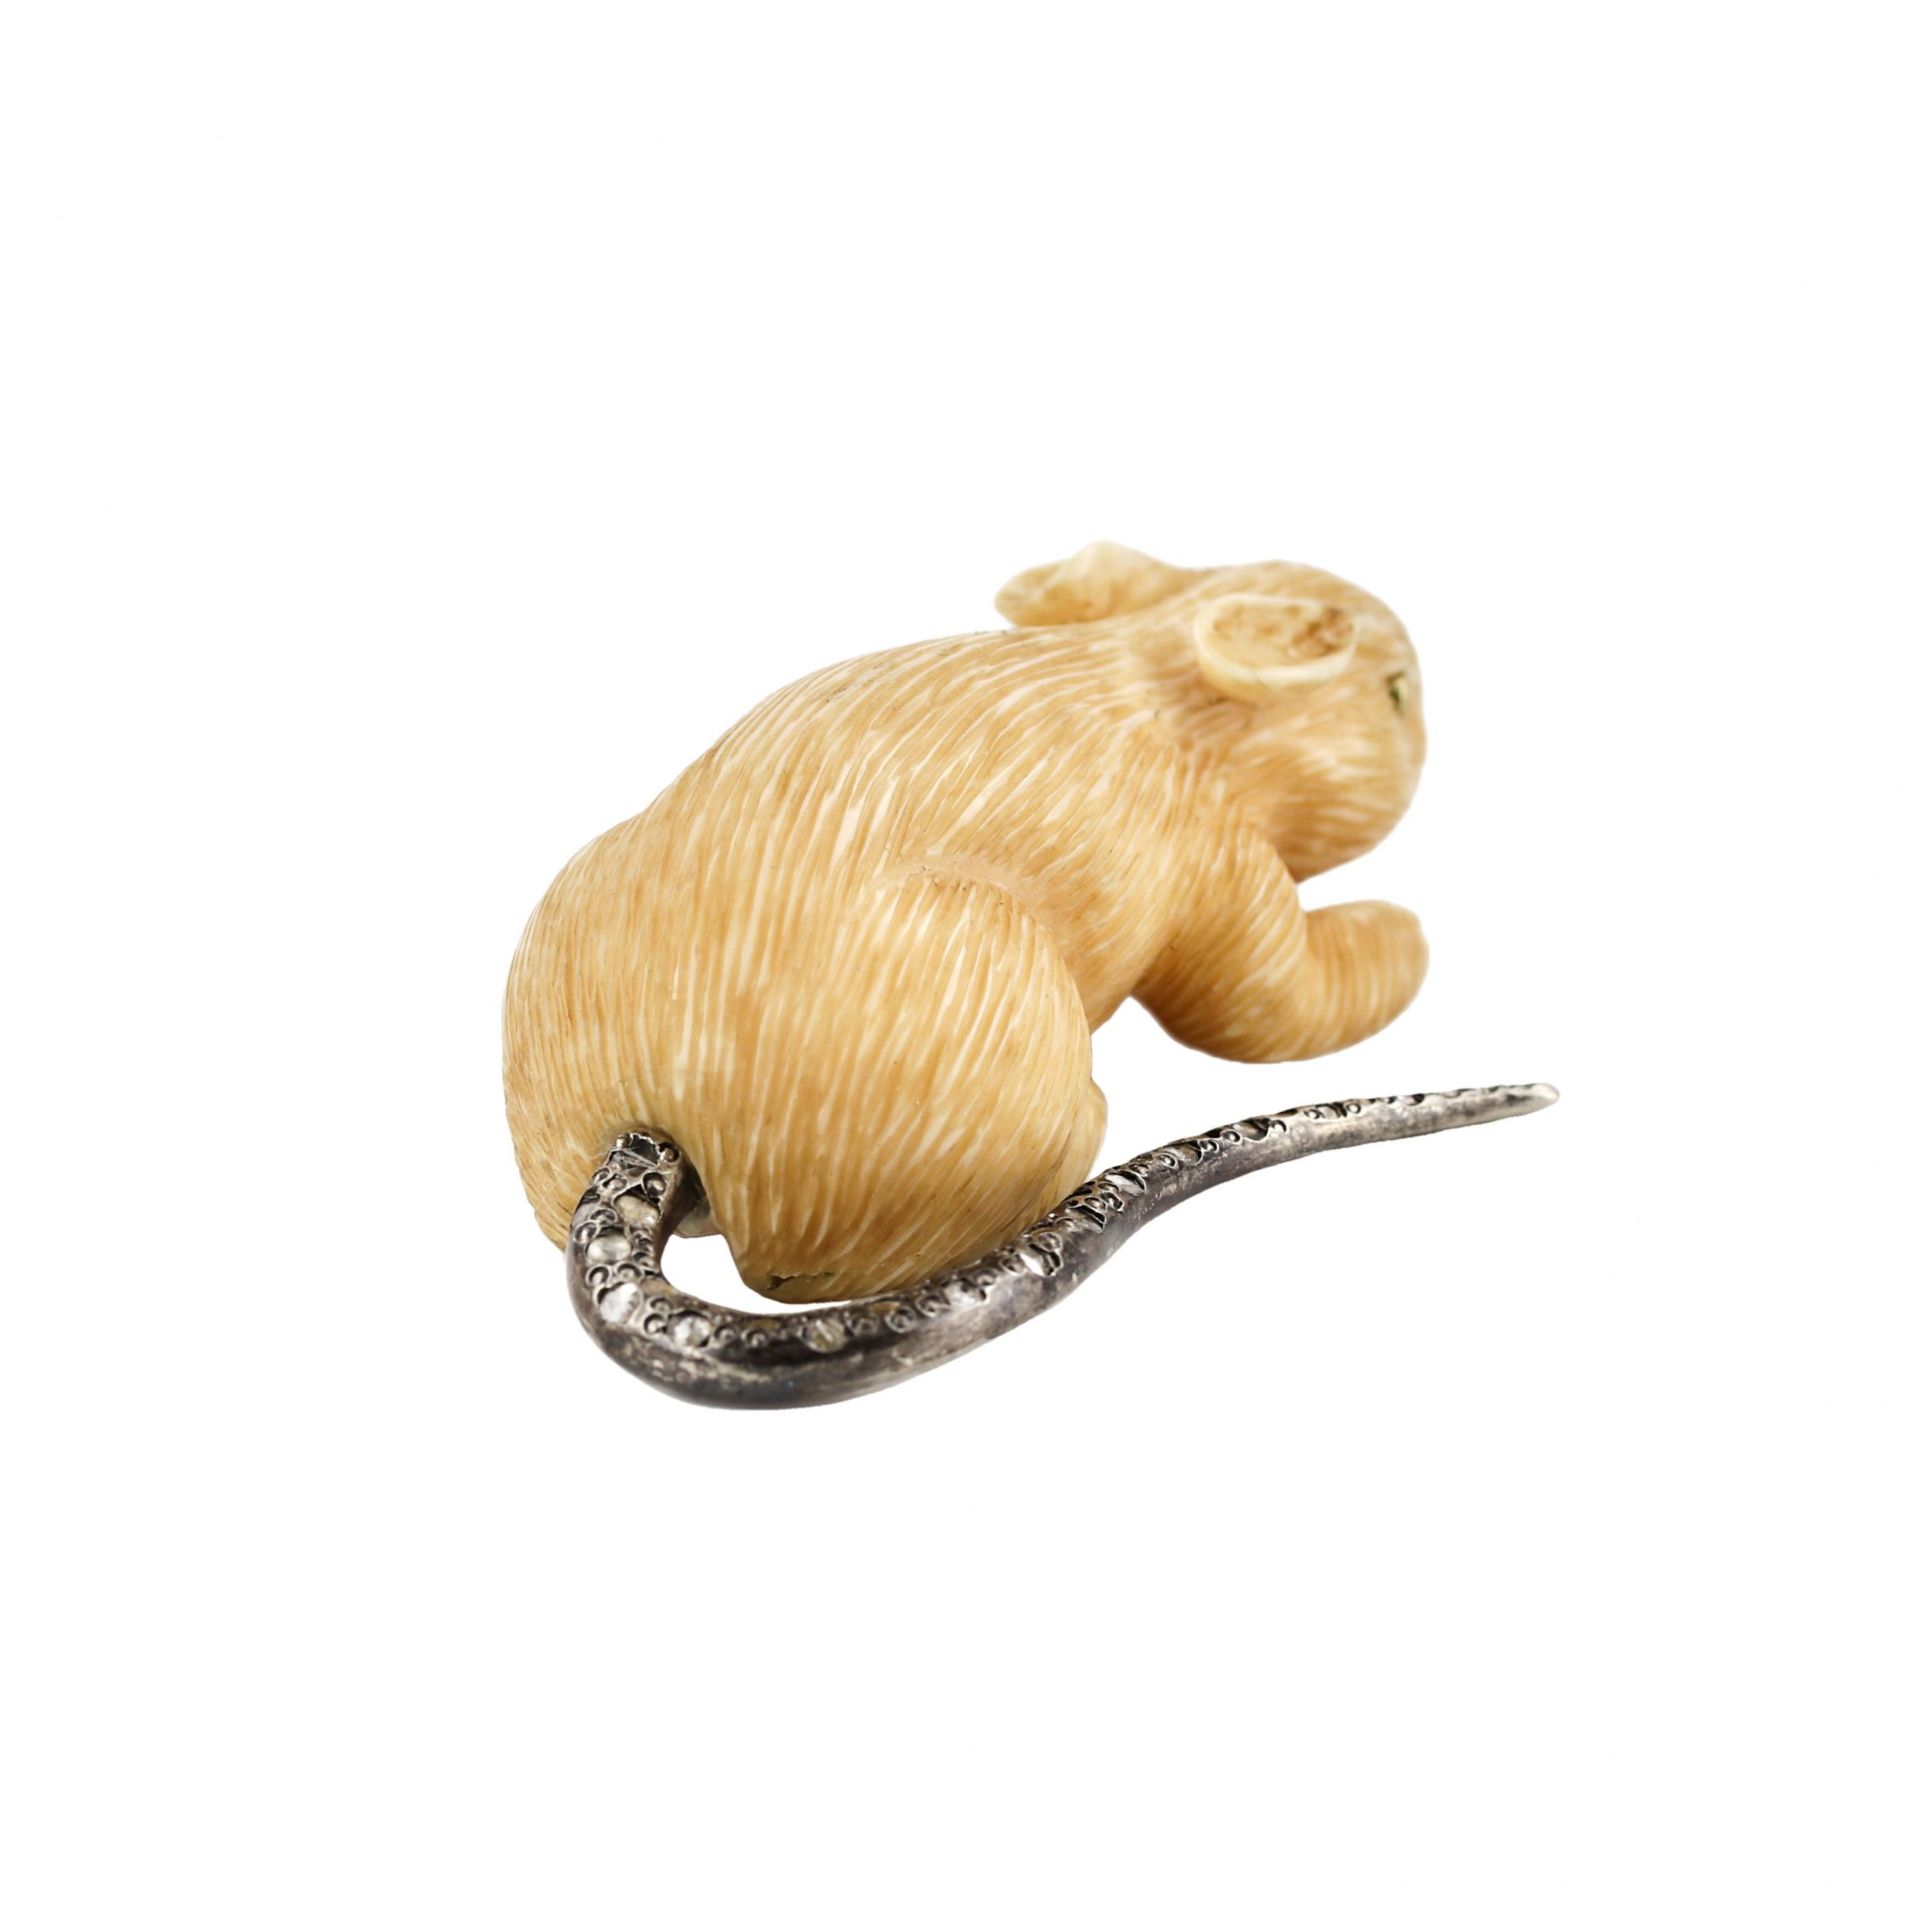 Carved mammoth tusk mouse with diamond tail. - Image 3 of 9